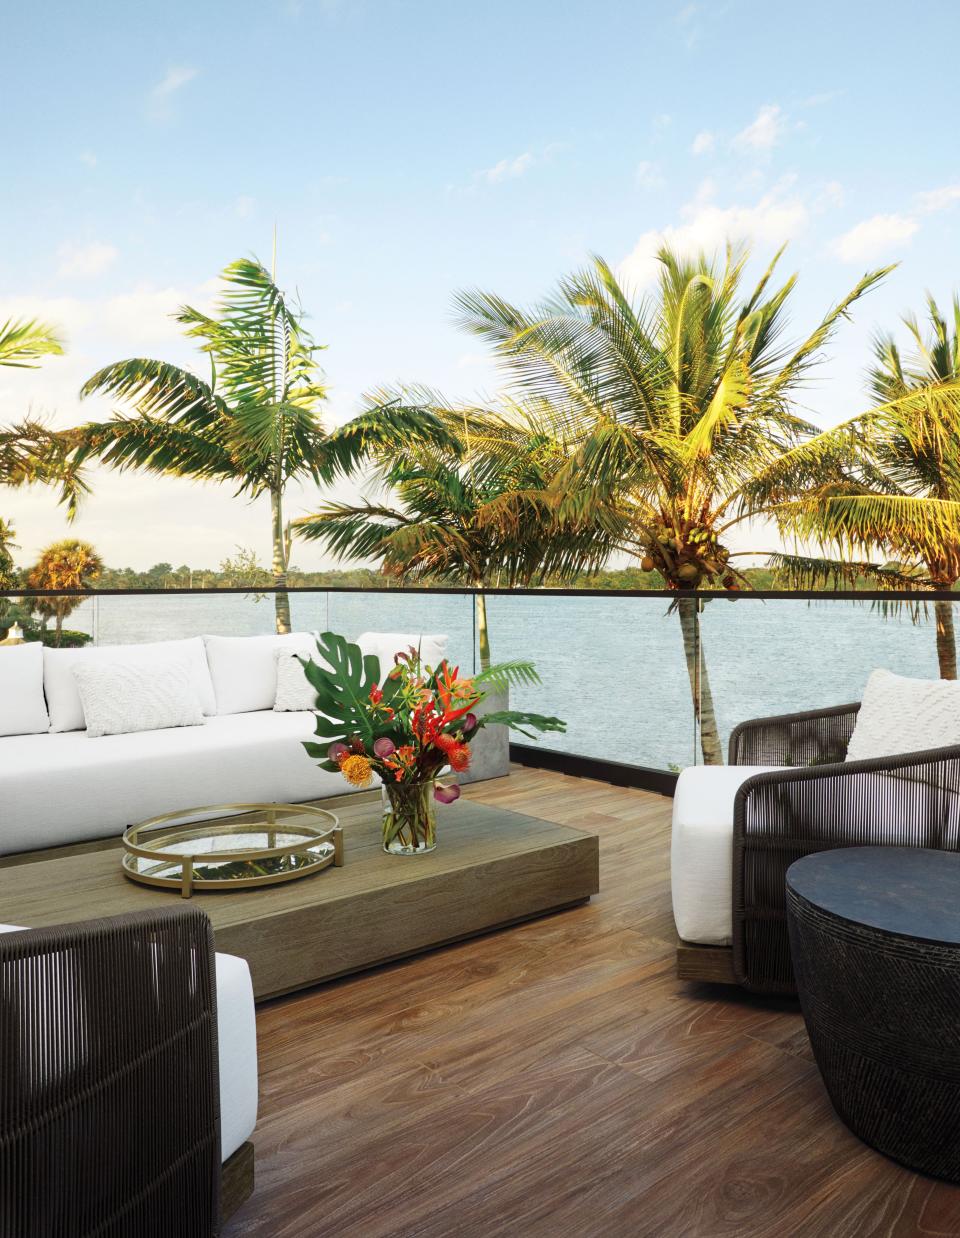 A terrace outfitted with RH furniture overlooks the water.